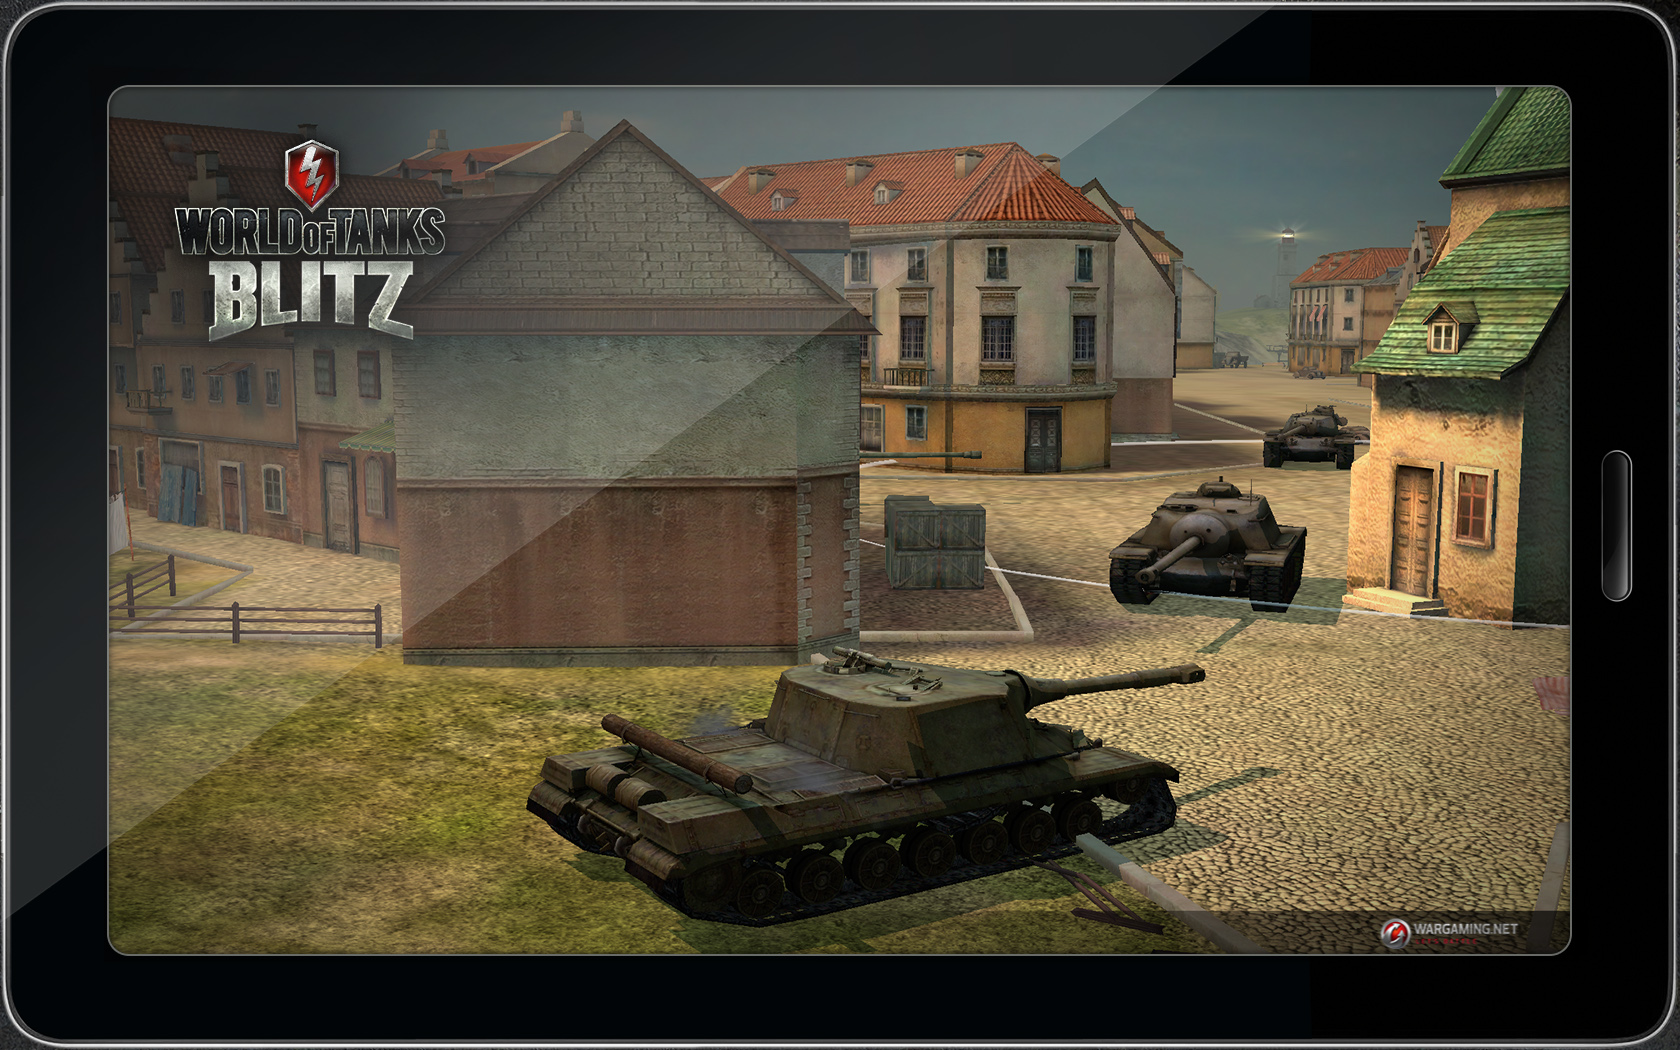 You can battle with tanks on the move with World of Tanks Blitz for tablets and smartphones